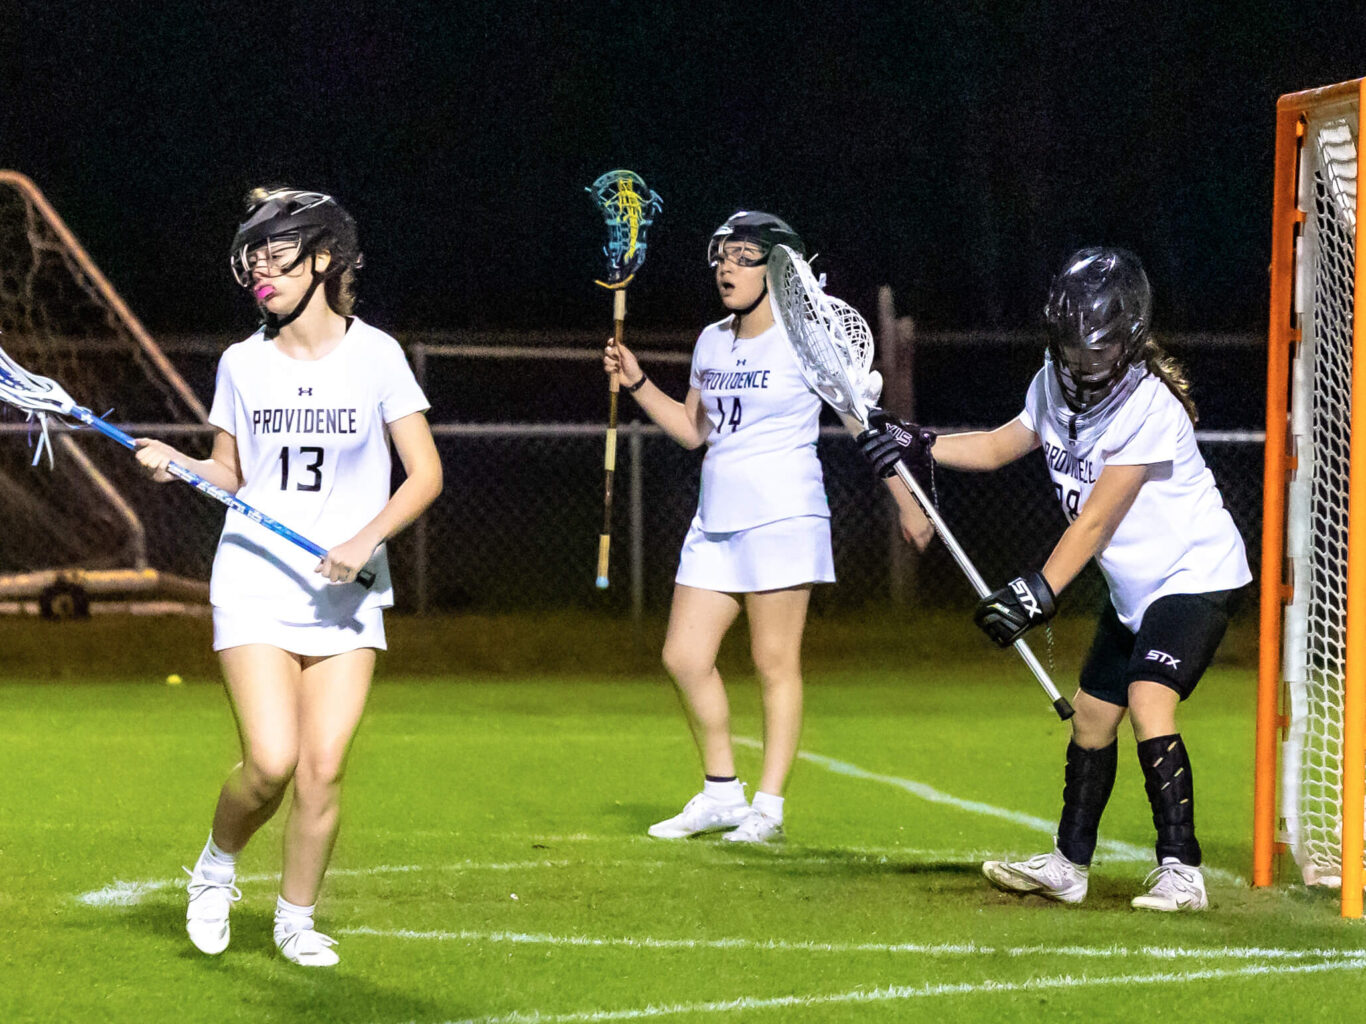 A group of girls engaged in a lacrosse game on a field.